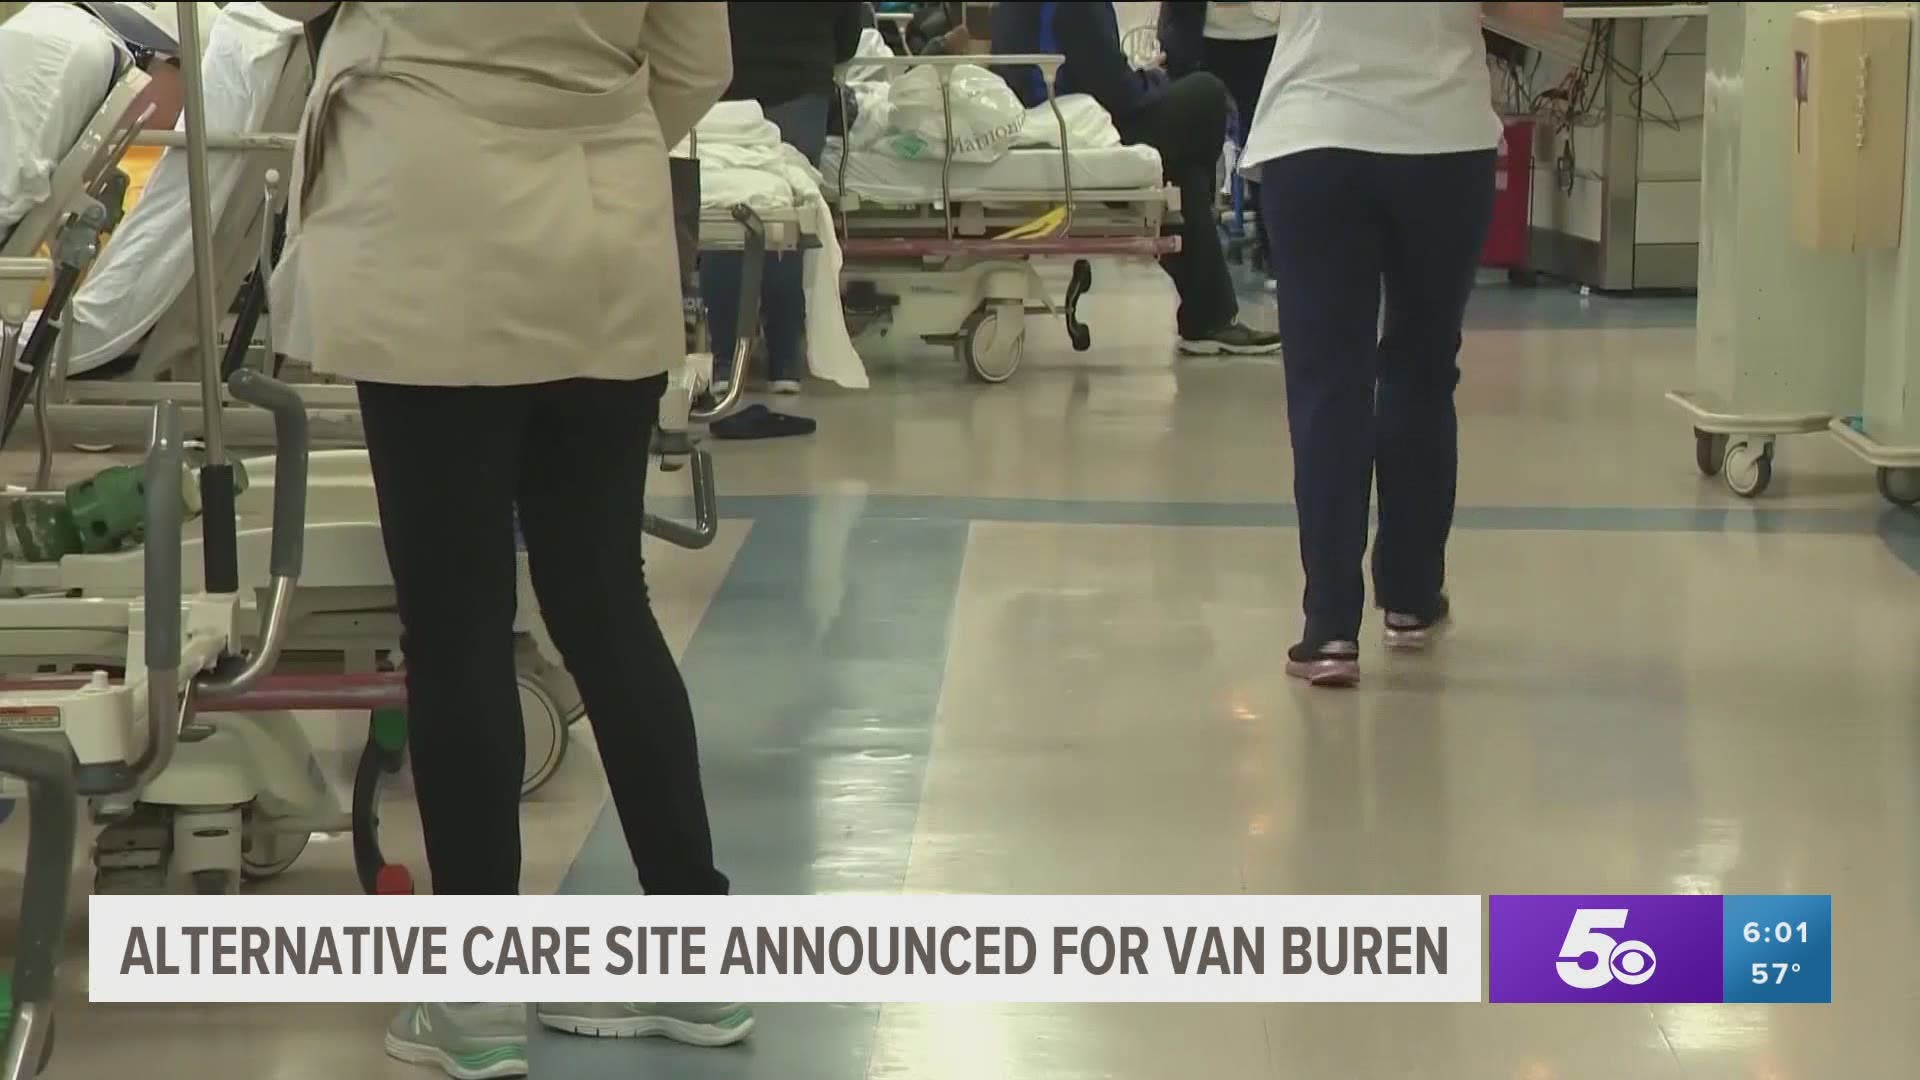 The state will create two alternative care sites for additional hospital bed space for COVID-19 patients in Arkansas.